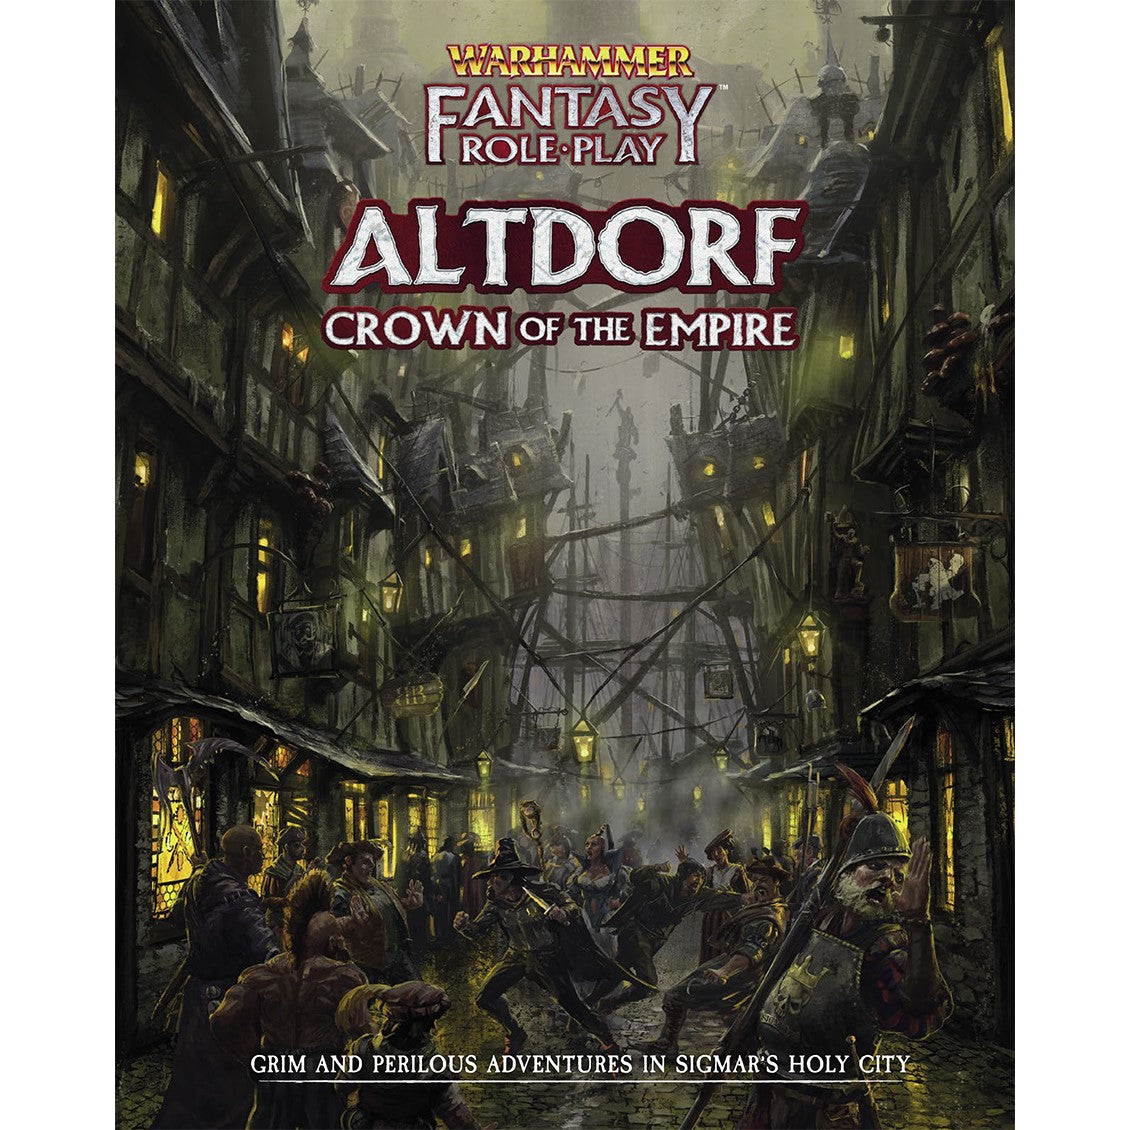 Warhammer Fantasy Role-Play: Altdorf Crown of the Empire